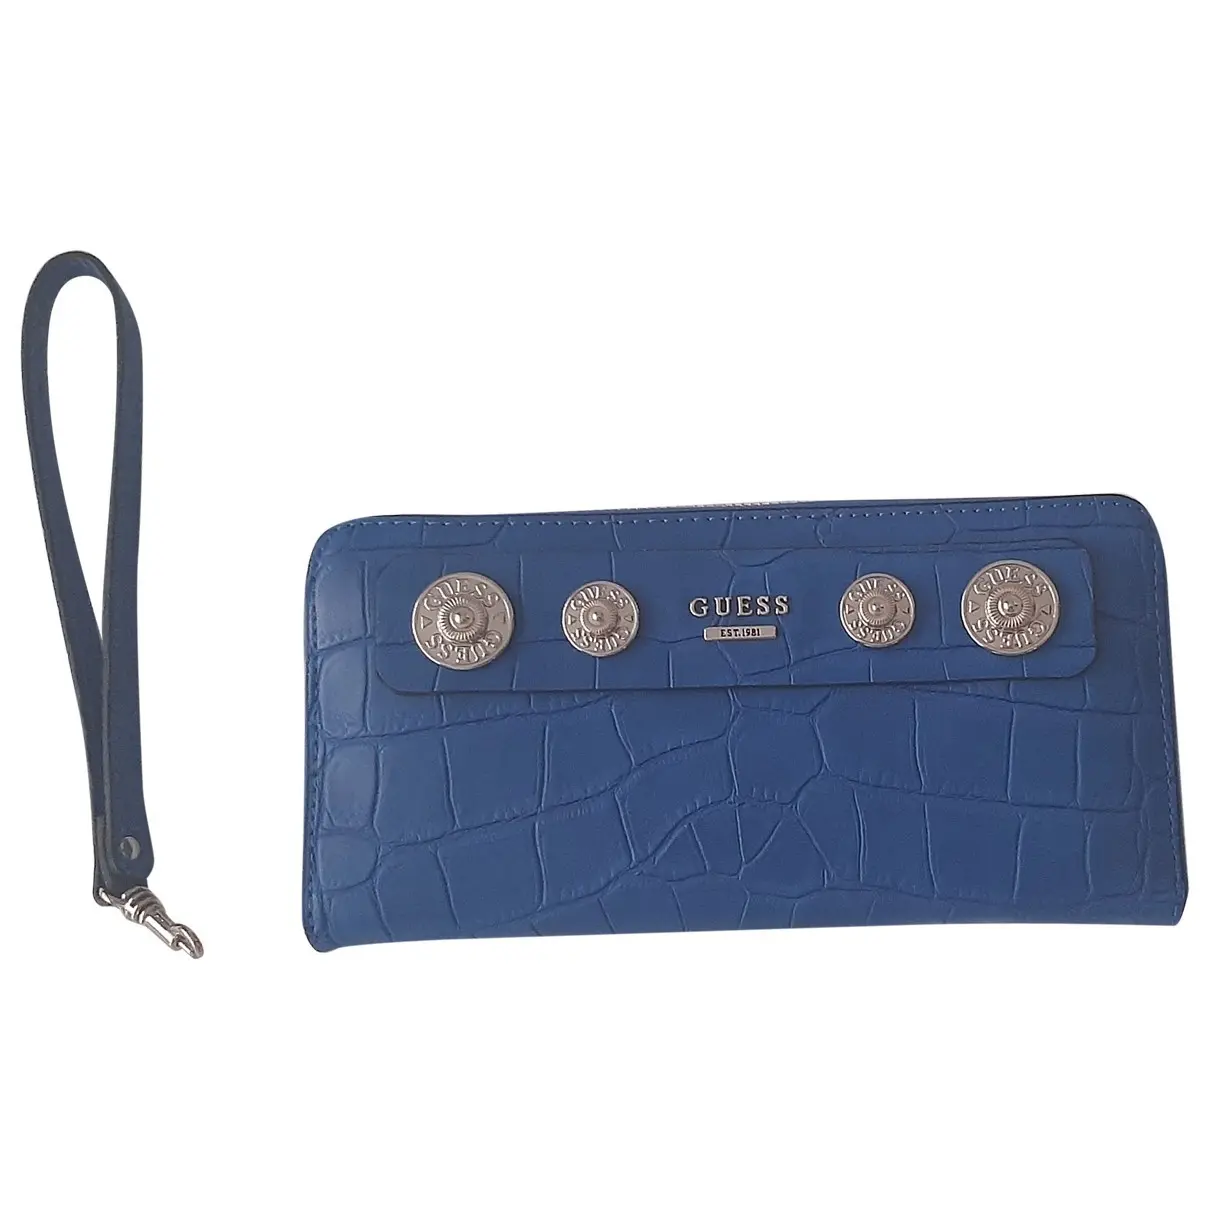 Leather clutch bag GUESS